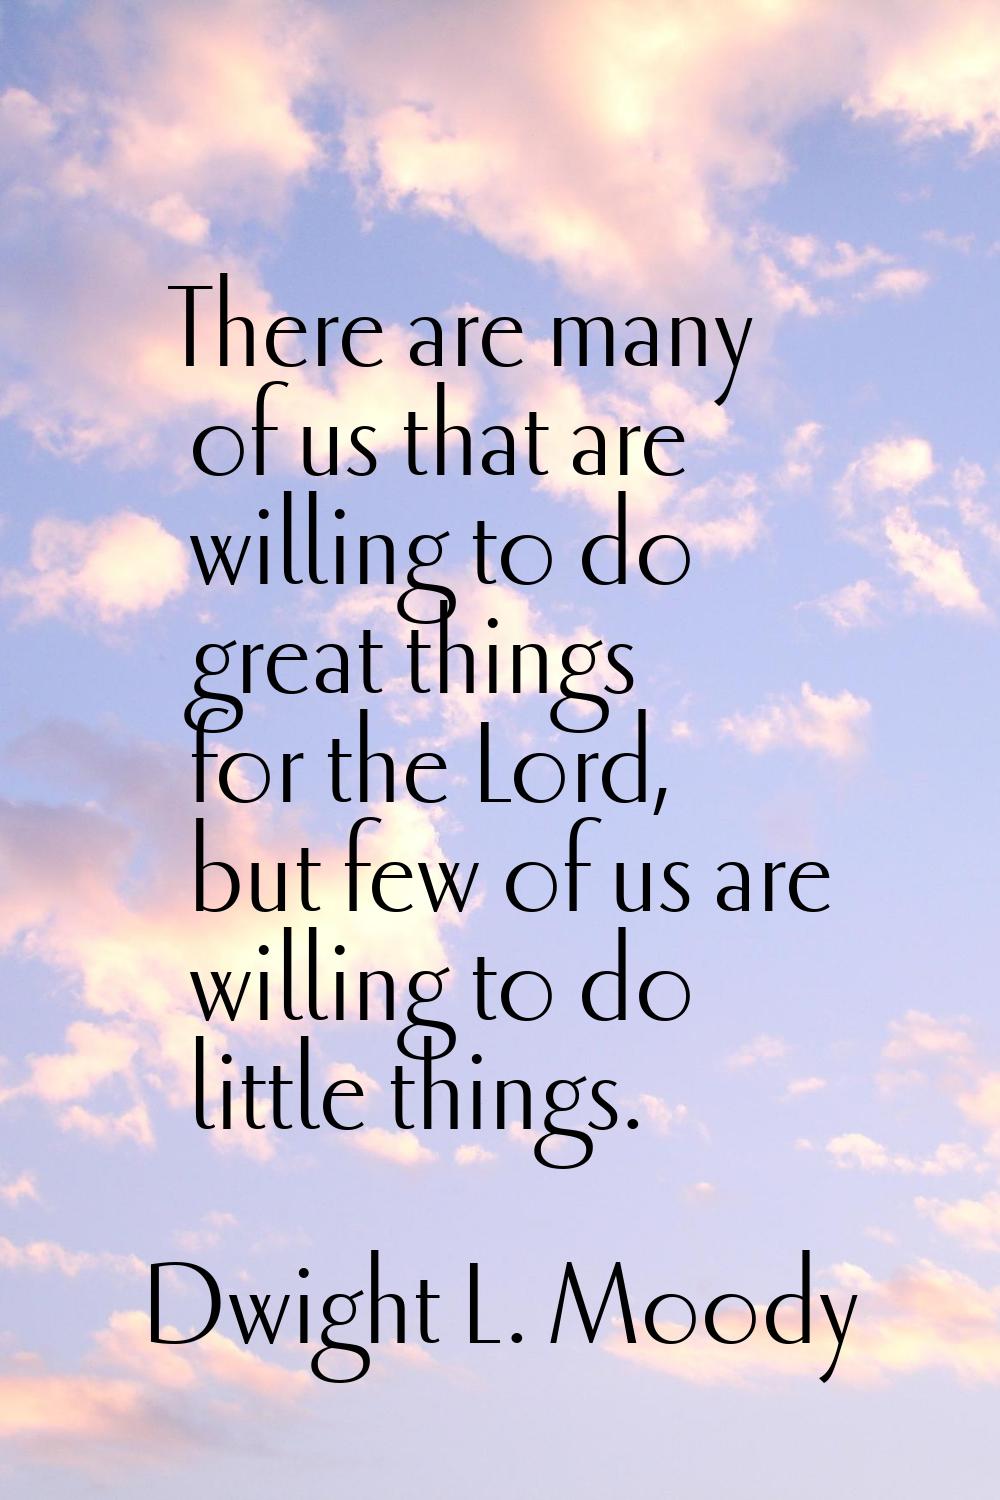 There are many of us that are willing to do great things for the Lord, but few of us are willing to